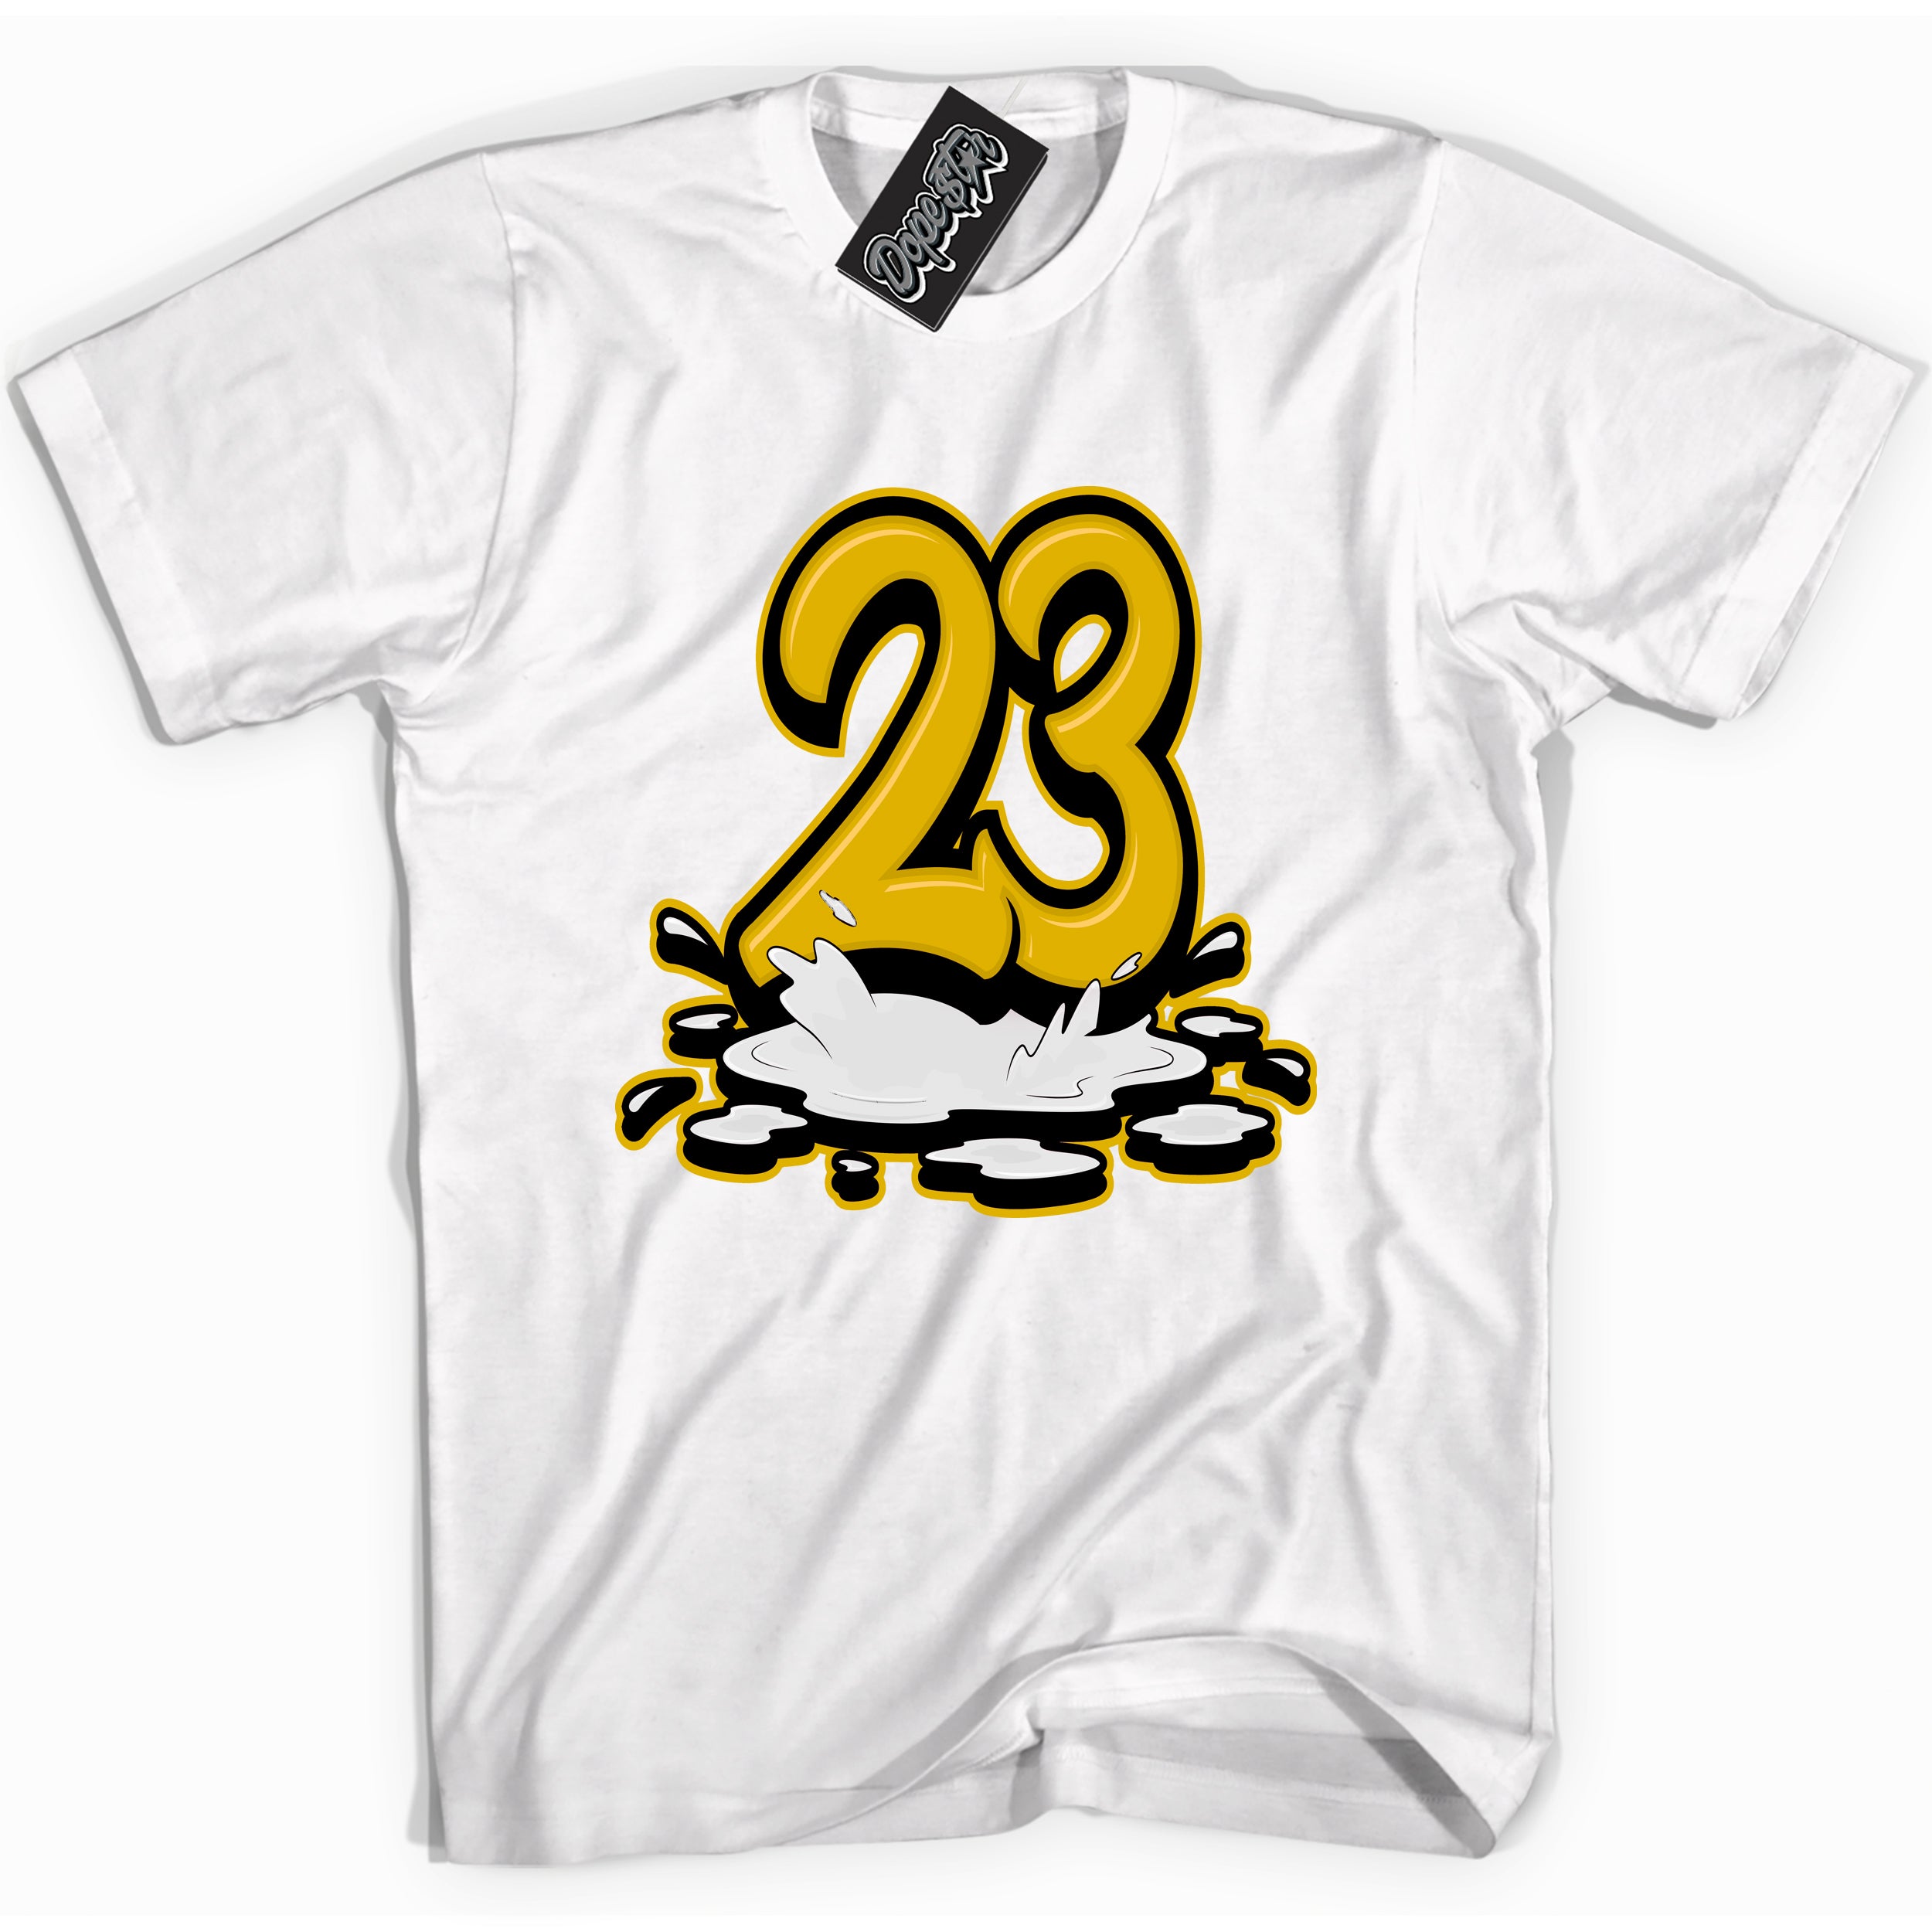 Cool White Shirt with “ 23 Melting ” design that perfectly matches Yellow Ochre 6s Sneakers.